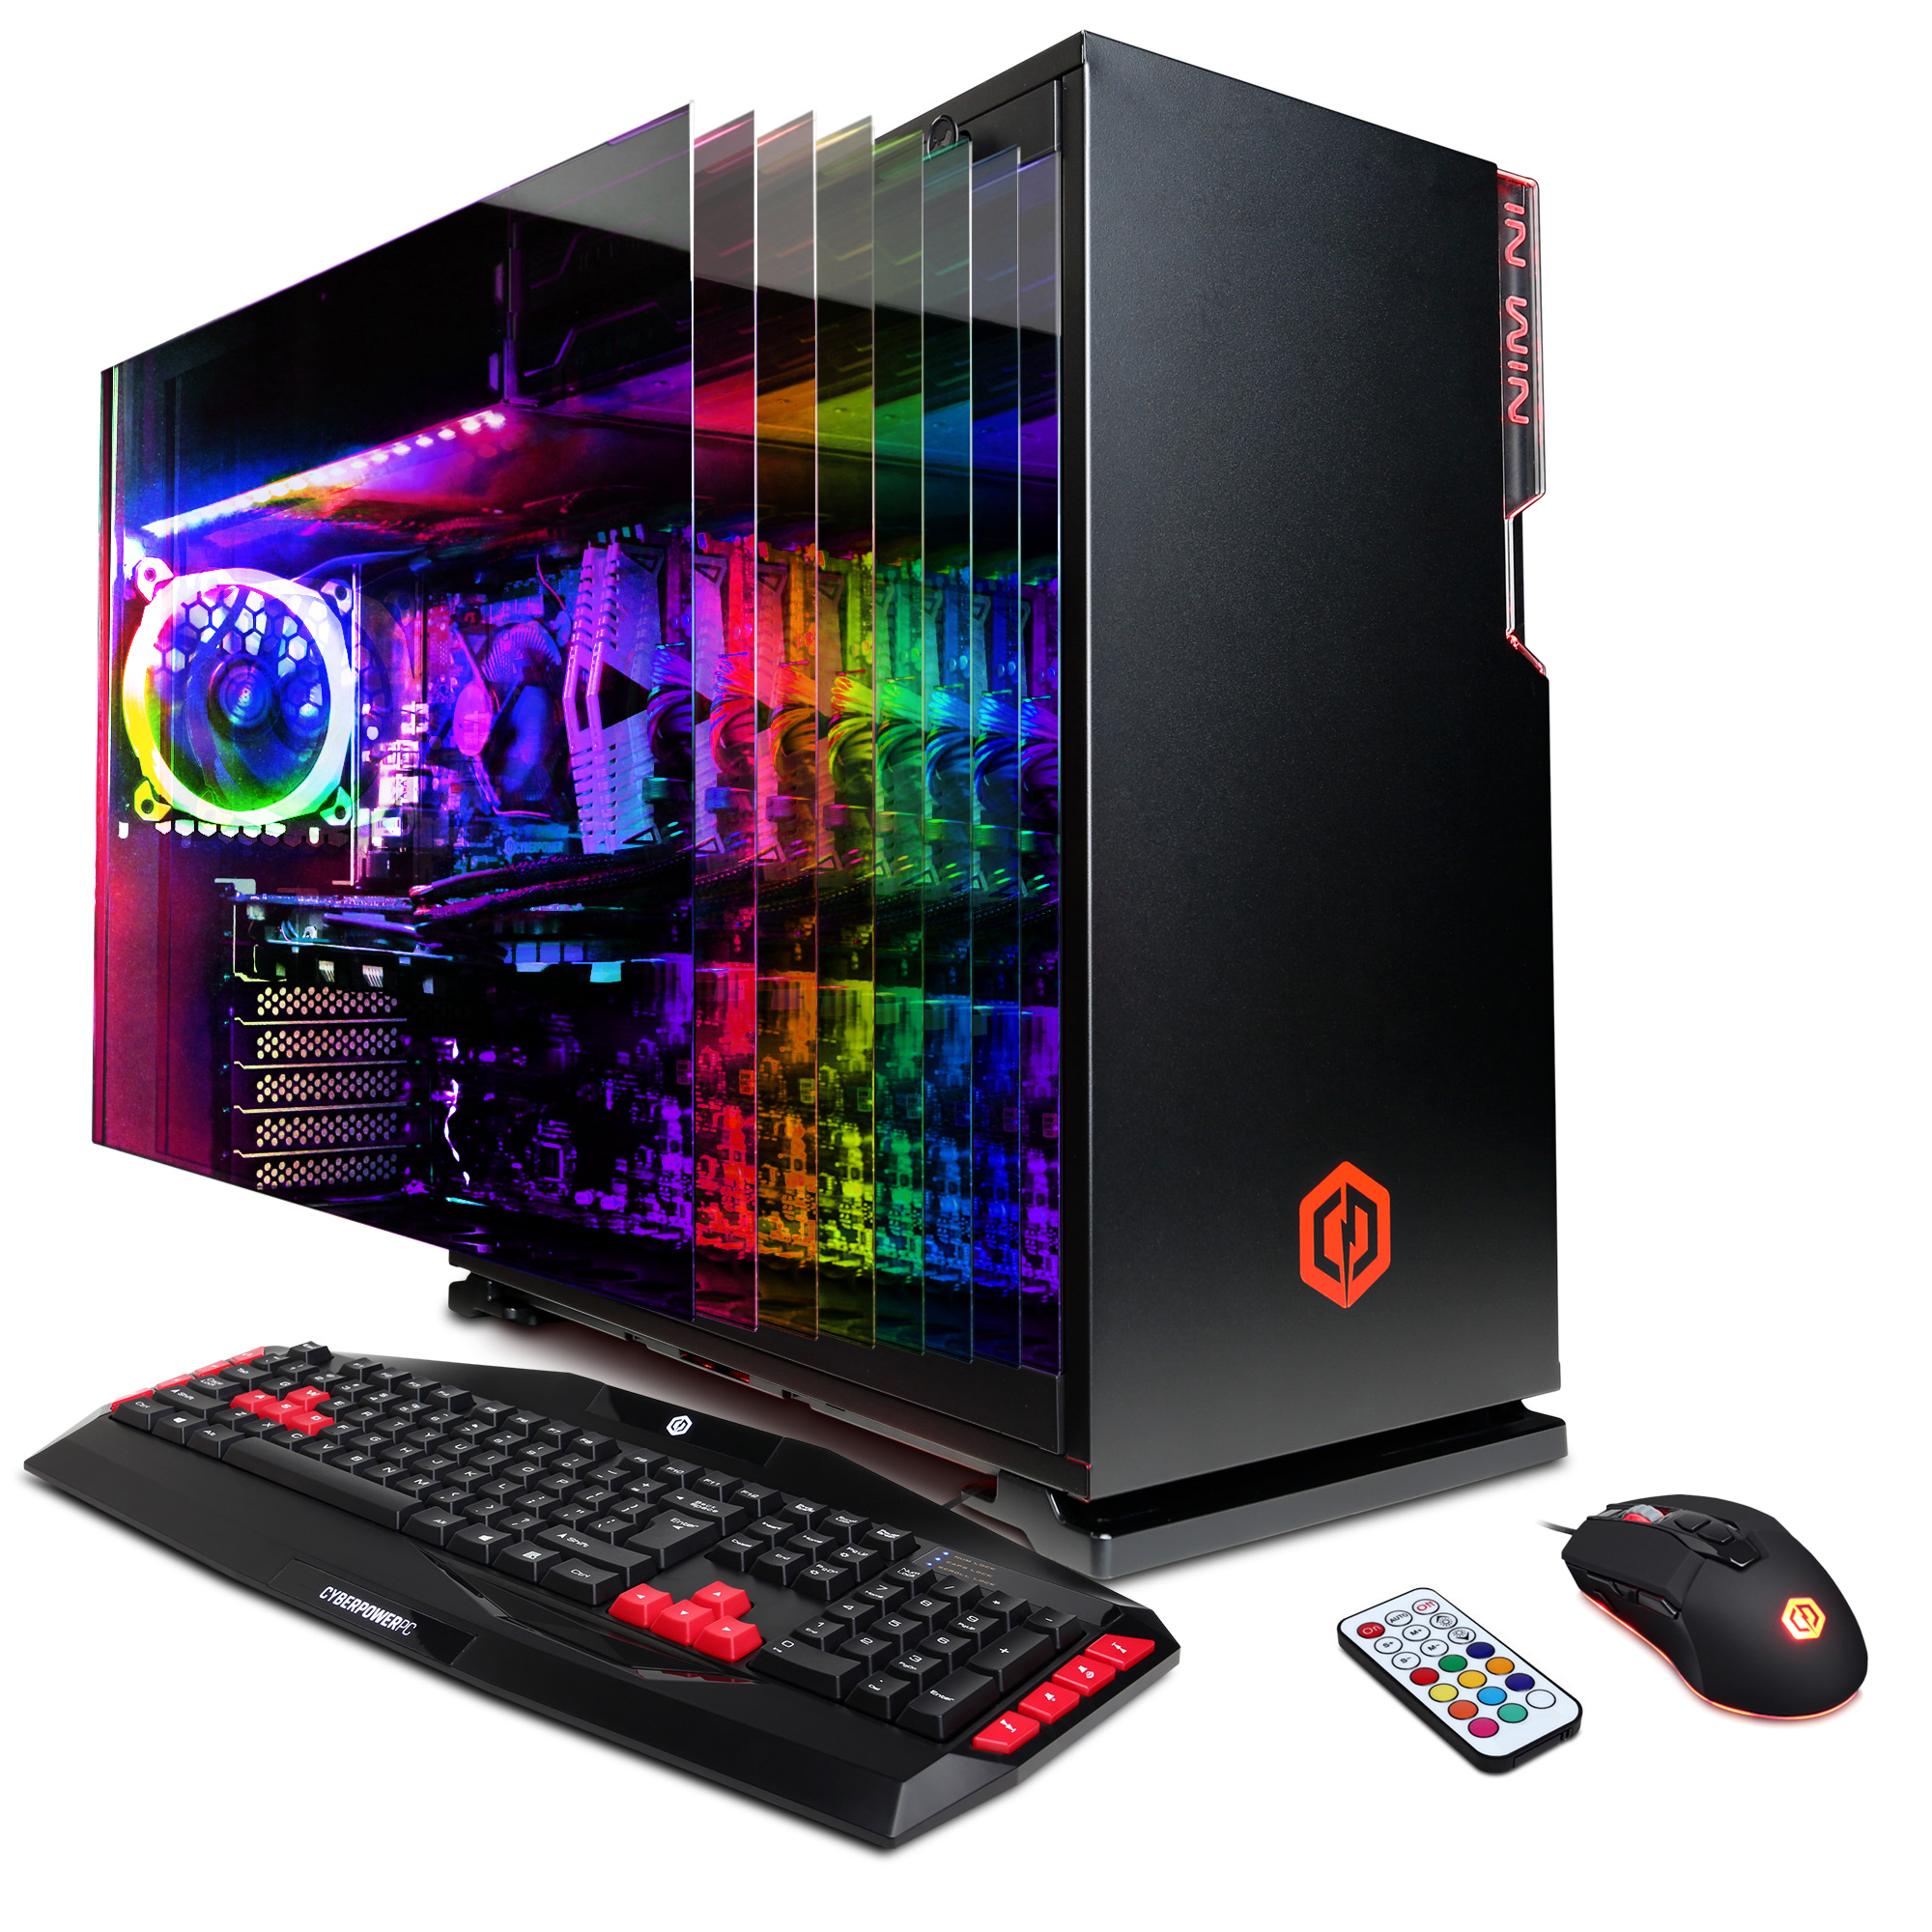 CYBERPOWERPC GXiVR3800WST Xtreme VR Gaming Desktop Computer with 8th Gen Core i7, 16GB RAM, 240GB SSD + 1TB HDD